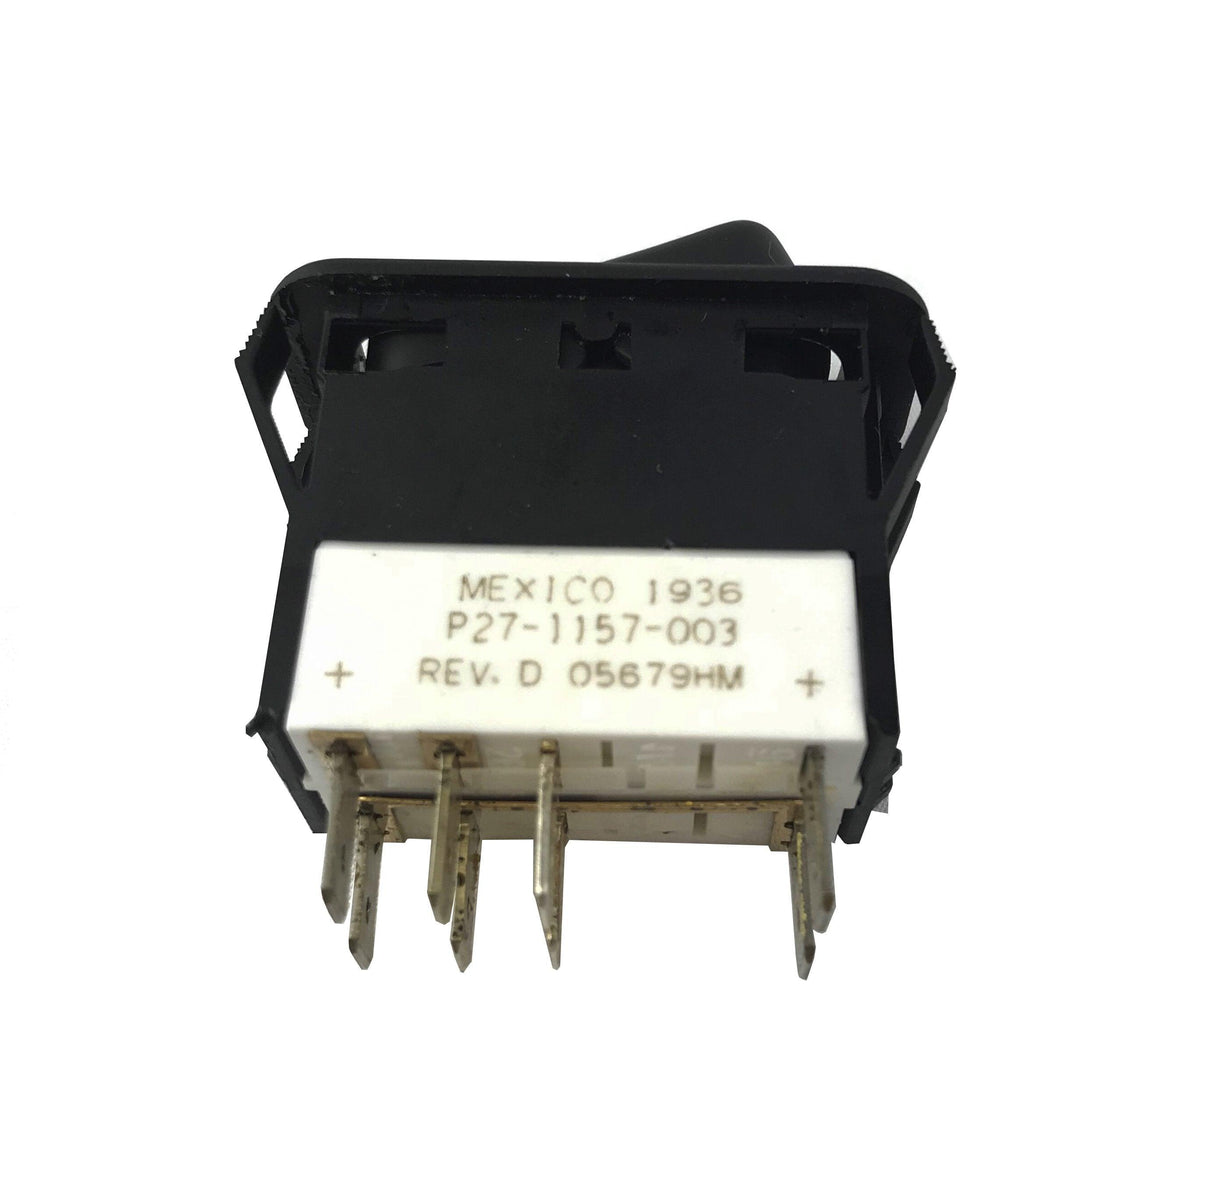 P27-1157-003 Genuine Paccar Sleeper Footwell Lamp Switch For Kenworth Peterbilt - Truck To Trailer